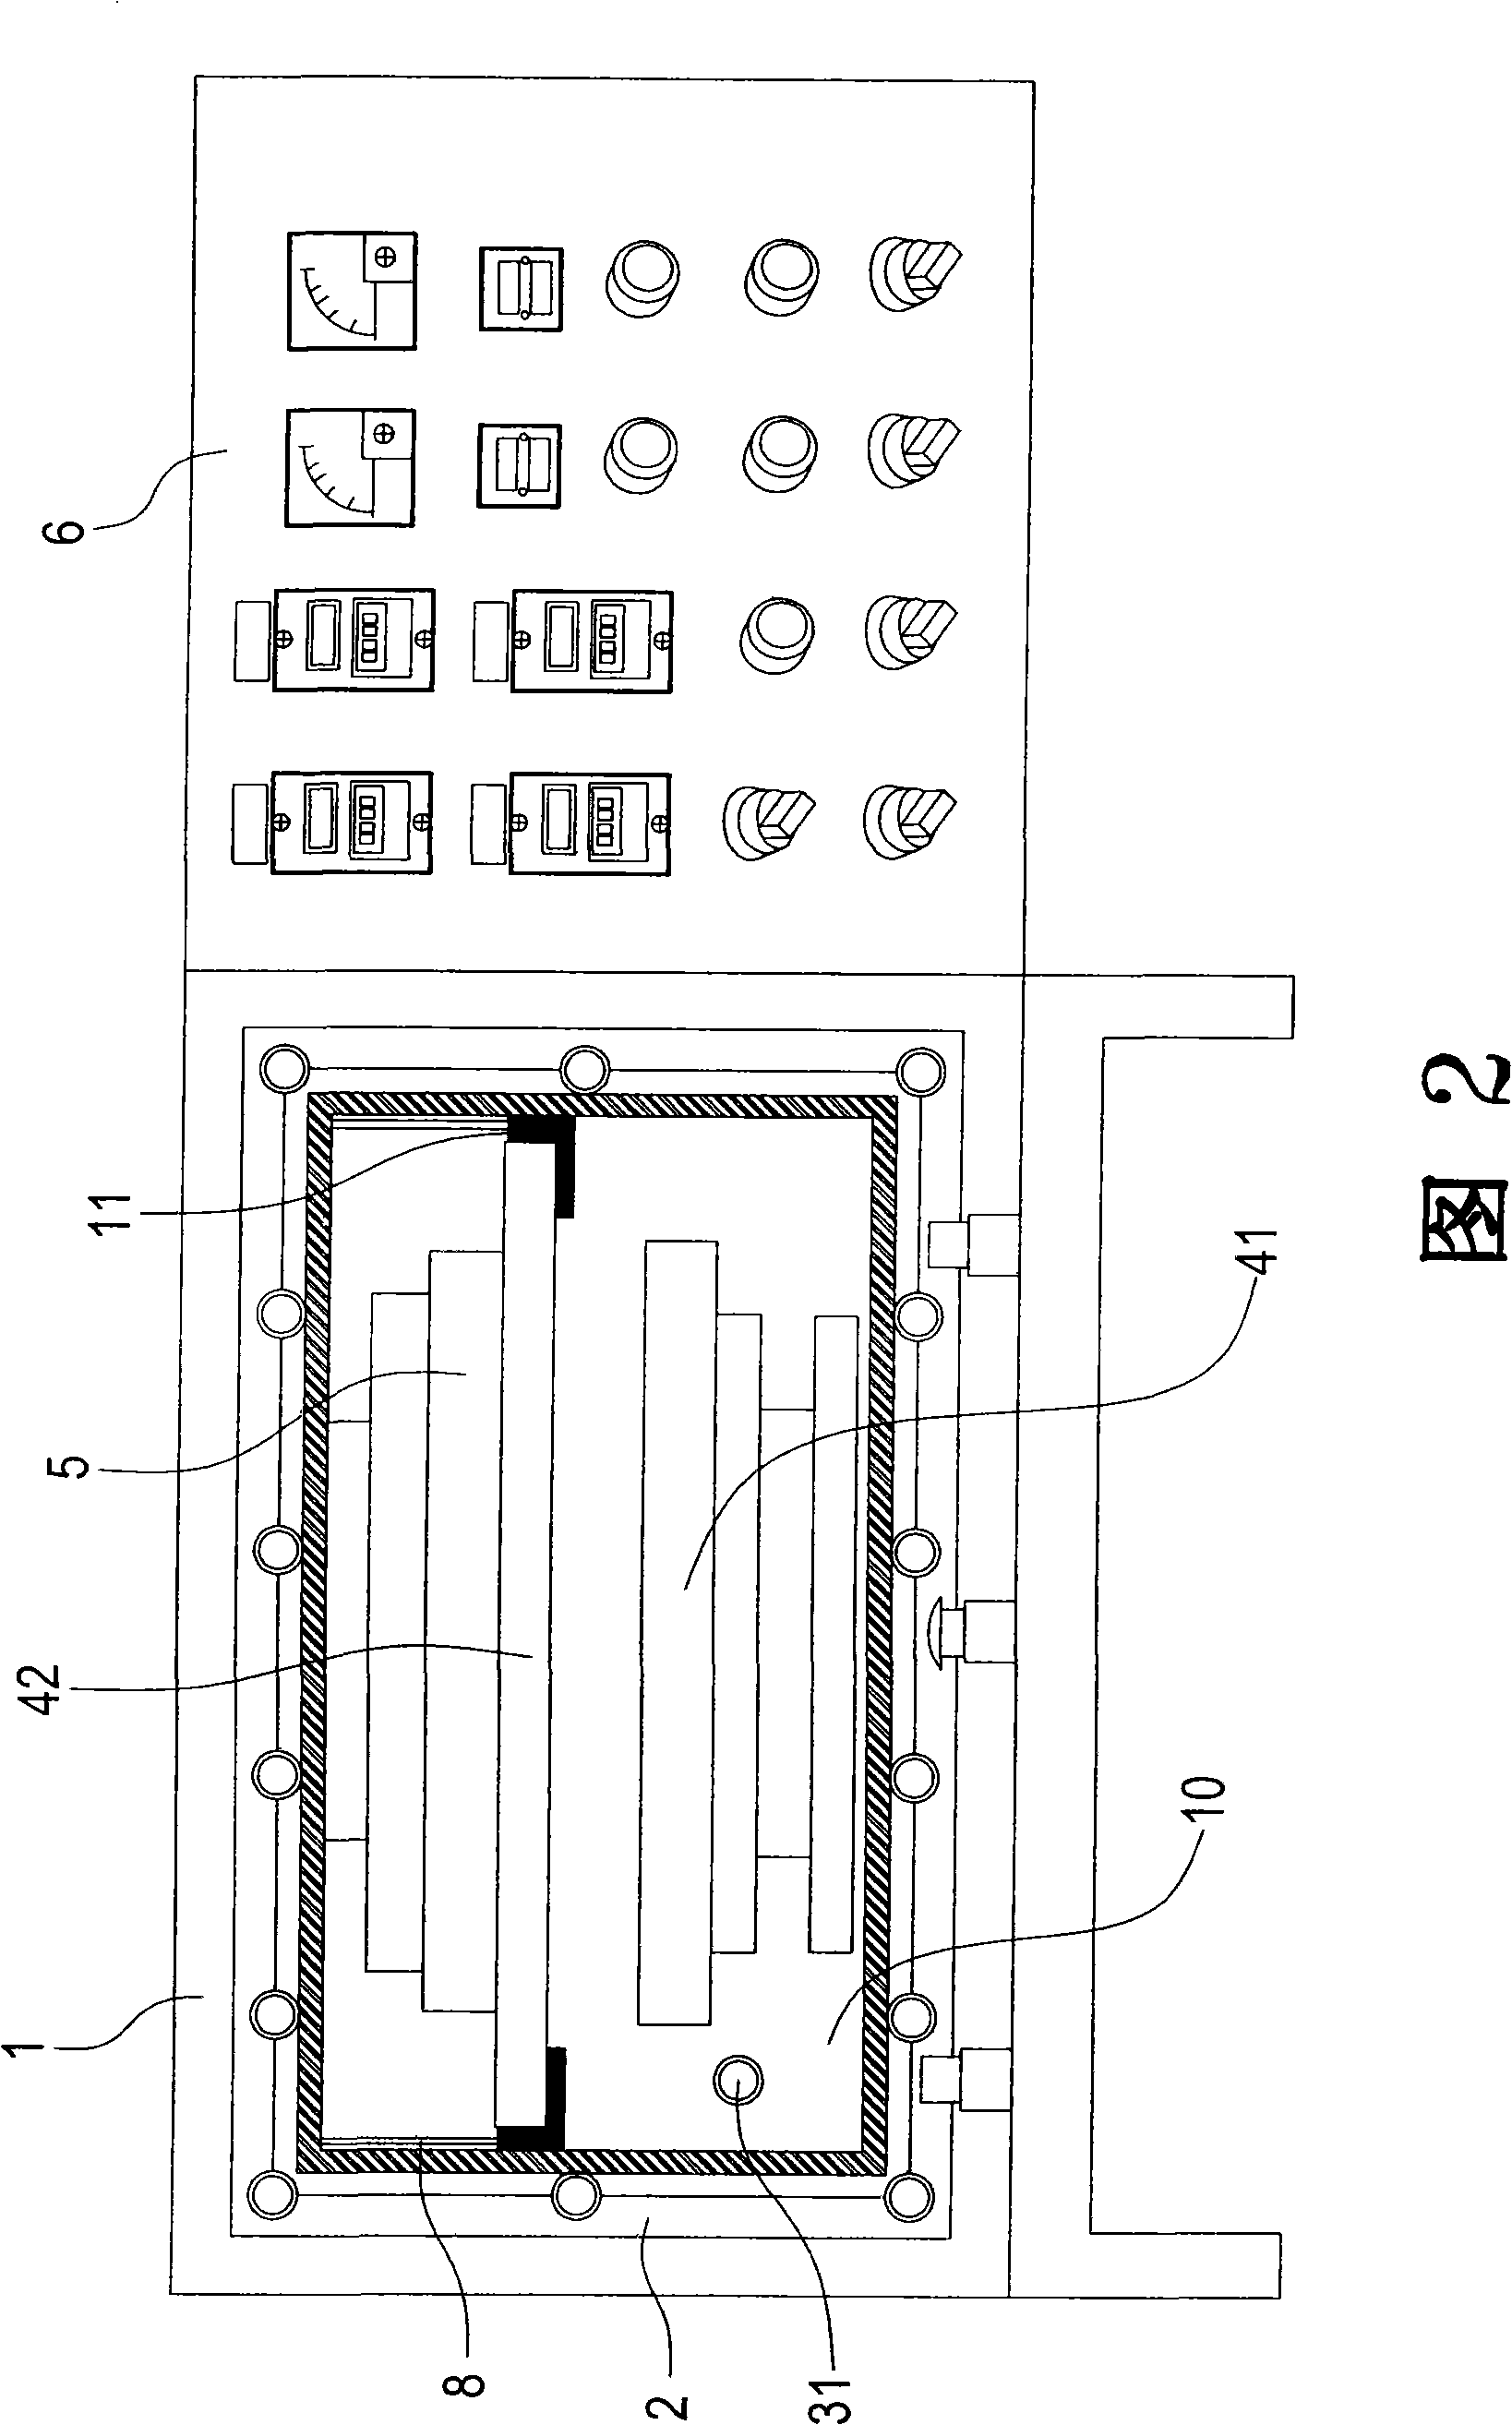 Fluid packing forming device and method thereof